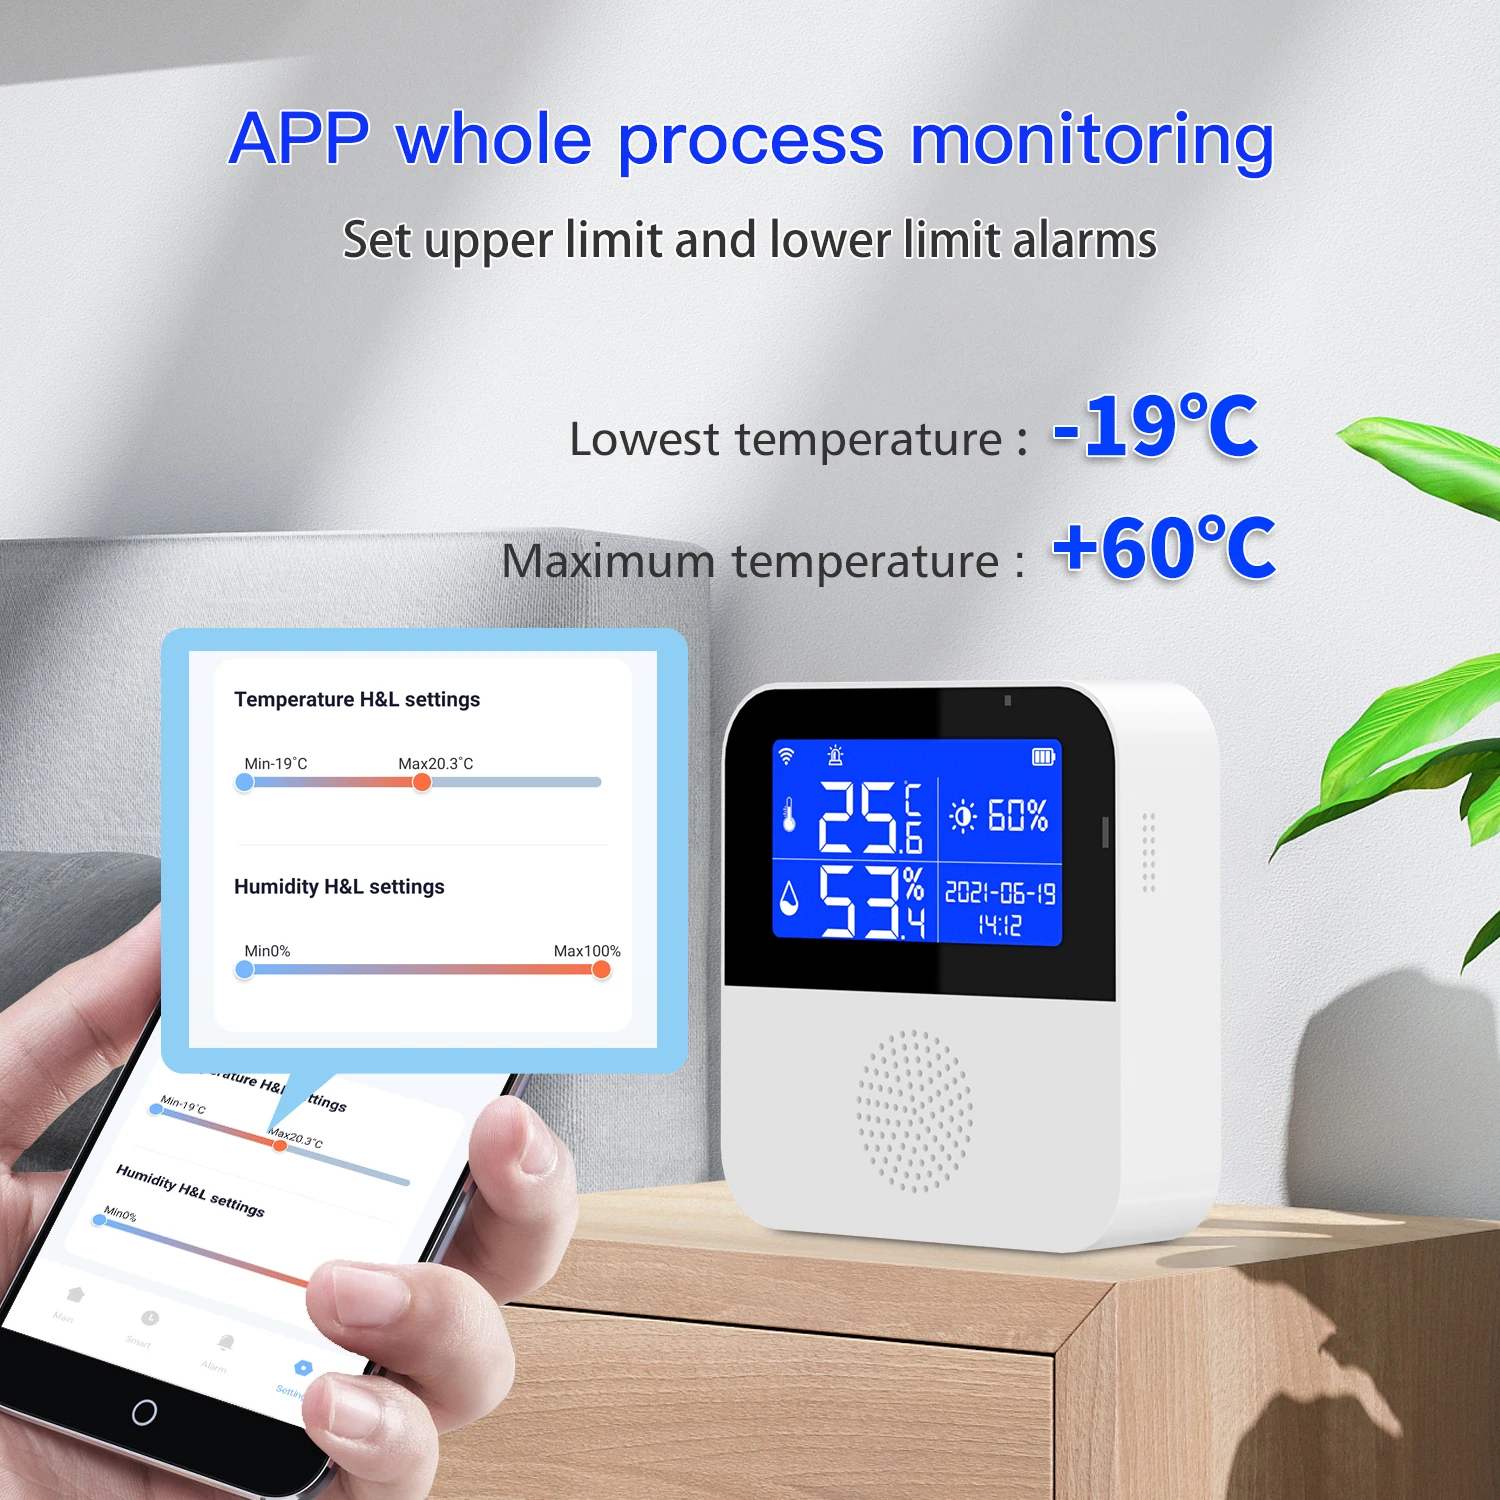 https://ae01.alicdn.com/kf/S13722d37b9984b6489795d6dd5e6aad2h/Tuya-Smart-WIFI-Temperature-and-Humidity-Sensor-with-Backlight-LCD-Display-Indoor-Thermometer-Hygrometer-Meter-Support.jpg